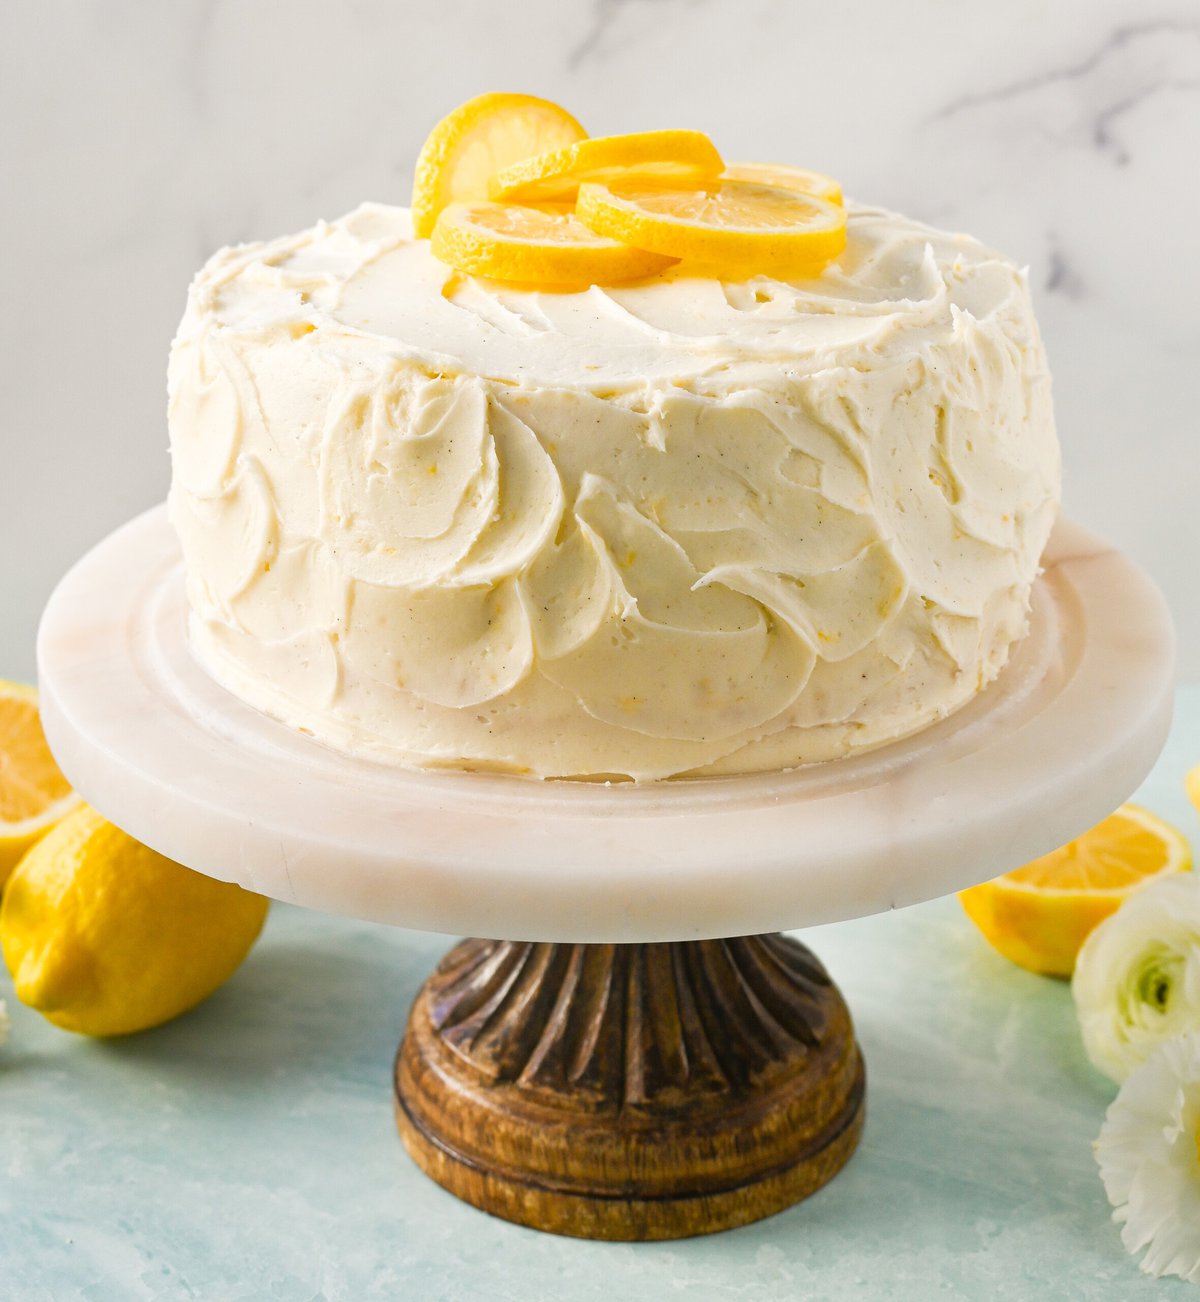 The Best Lemon Cake Recipe is moist, light, and fluffy made with fresh lemon juice and layered with lemon curd and lemon cream cheese frosting. This is the lemon cake of your dreams!